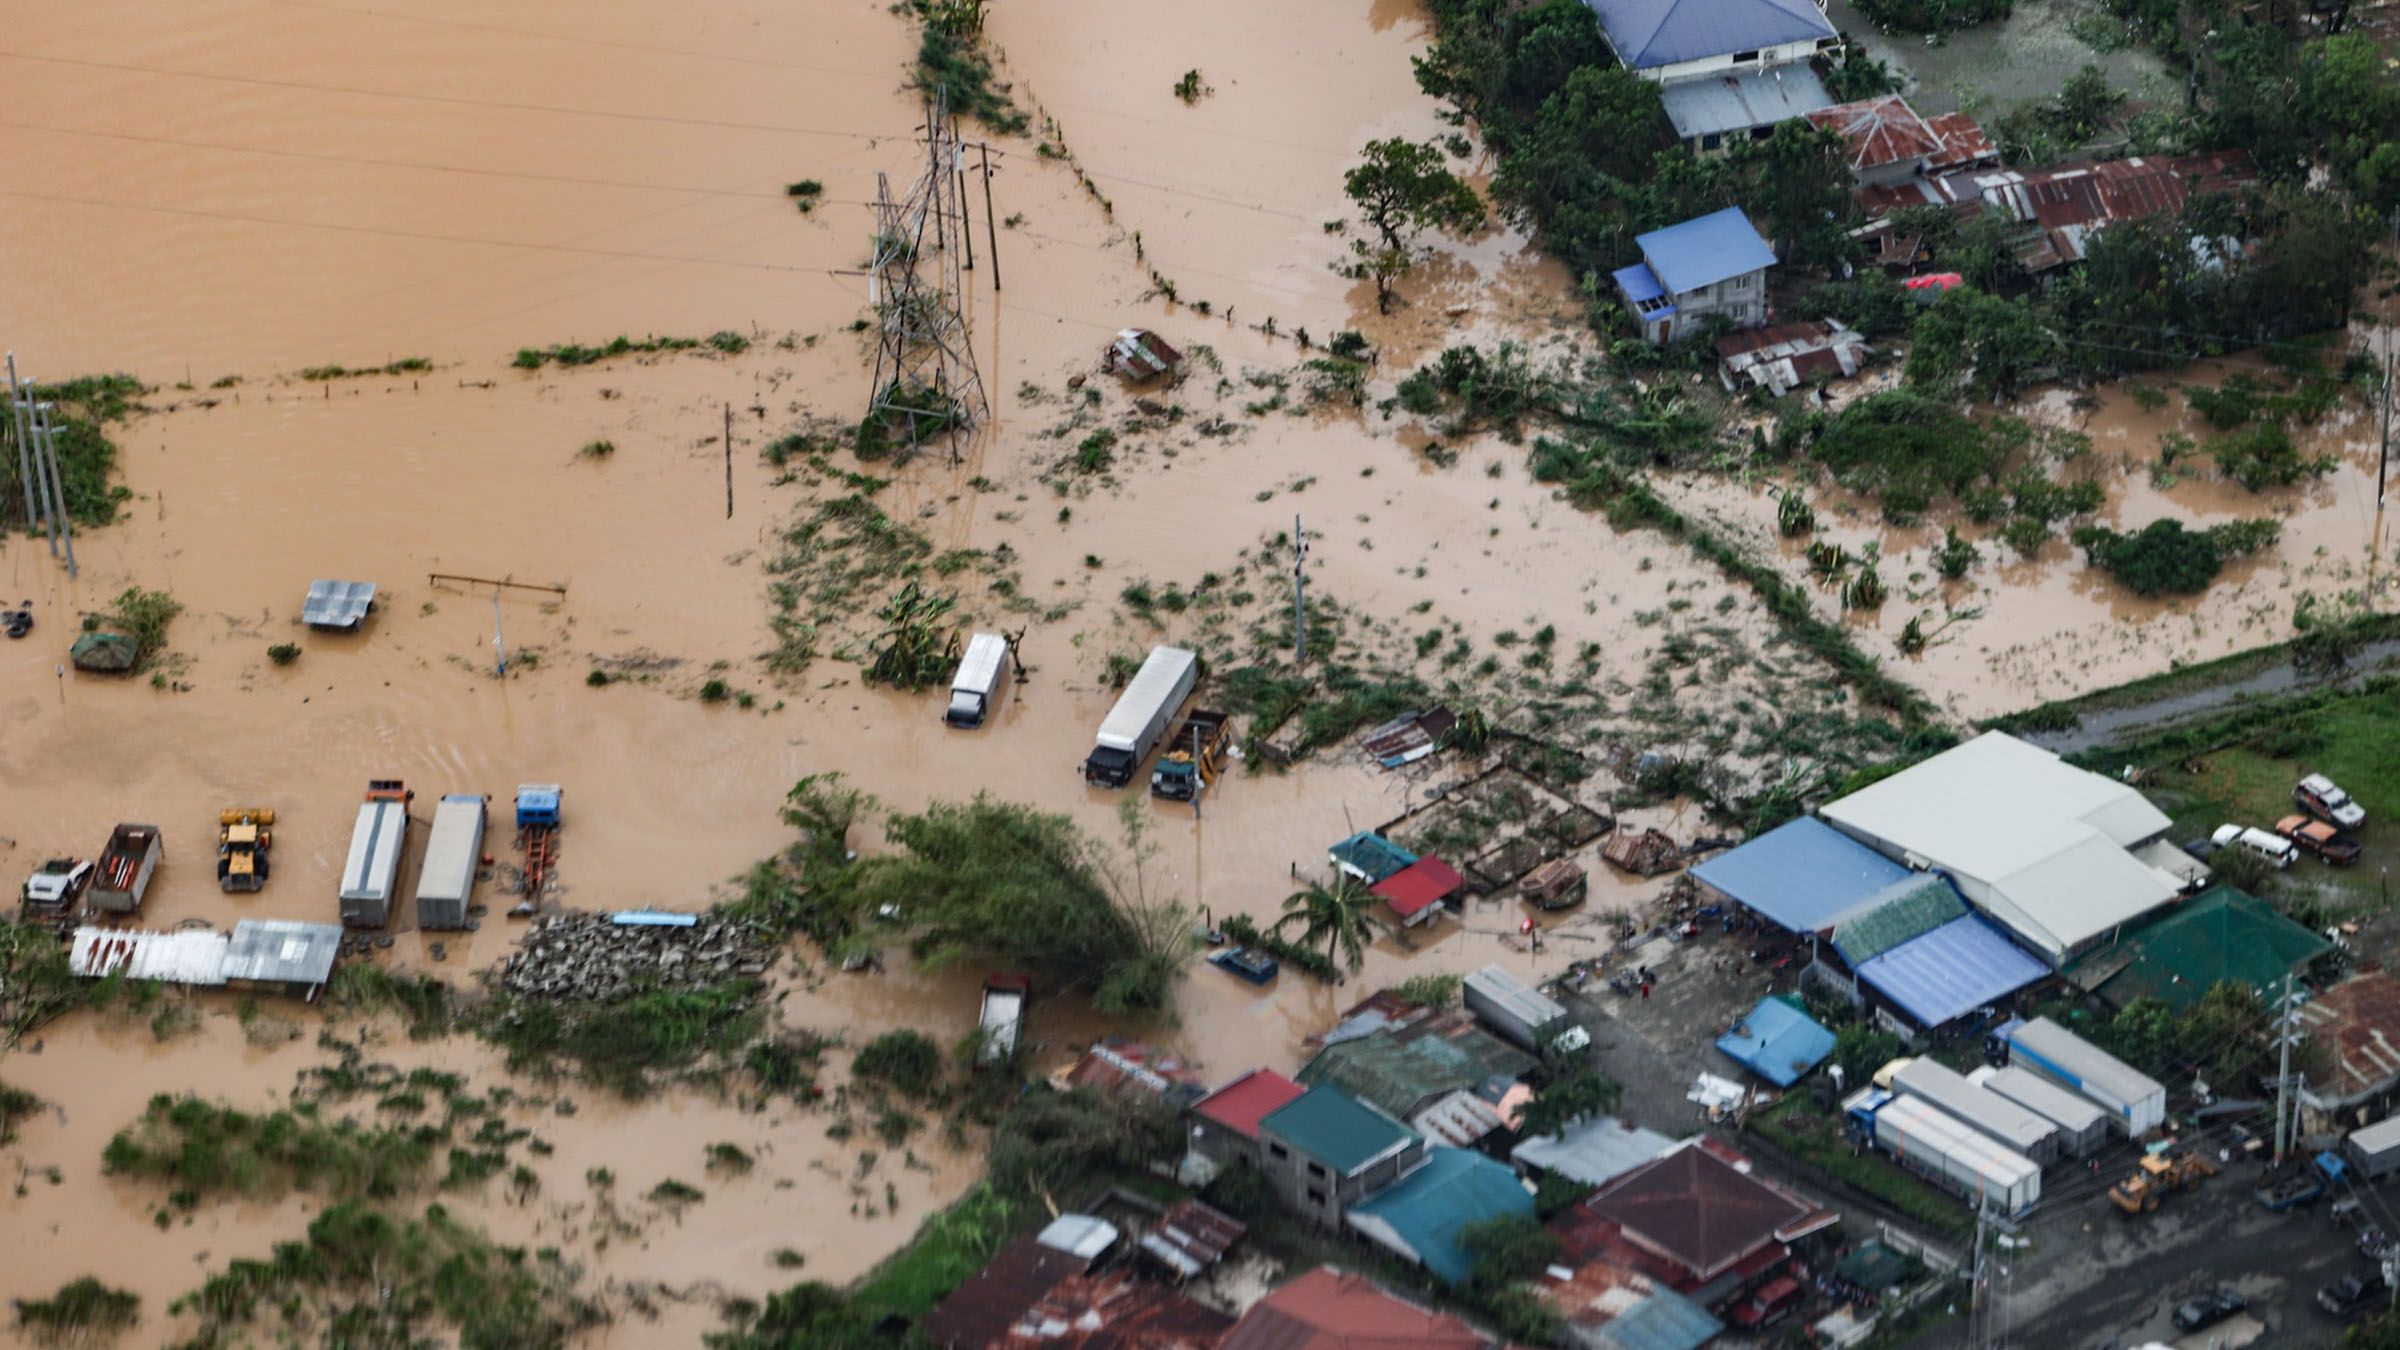 ₱2-M aid given to areas affected by the typhoon